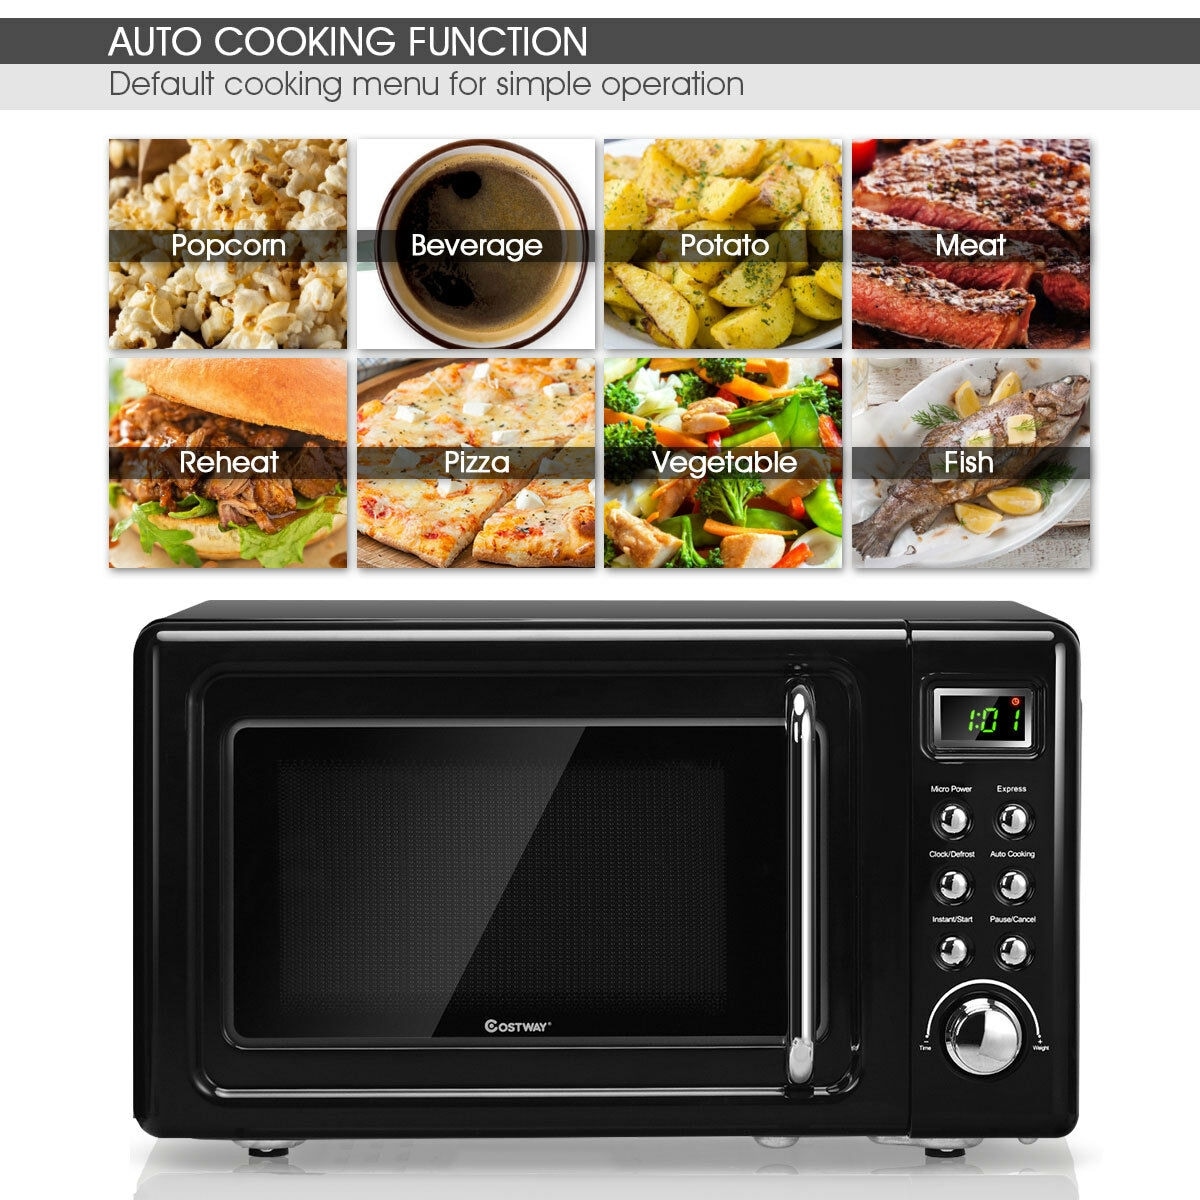 https://ak1.ostkcdn.com/images/products/is/images/direct/fa6eba810457a9328d681014291ee9c5eba0c269/Costway-0.7Cu.ft-Retro-Countertop-Microwave-Oven-700W-LED-Display.jpg